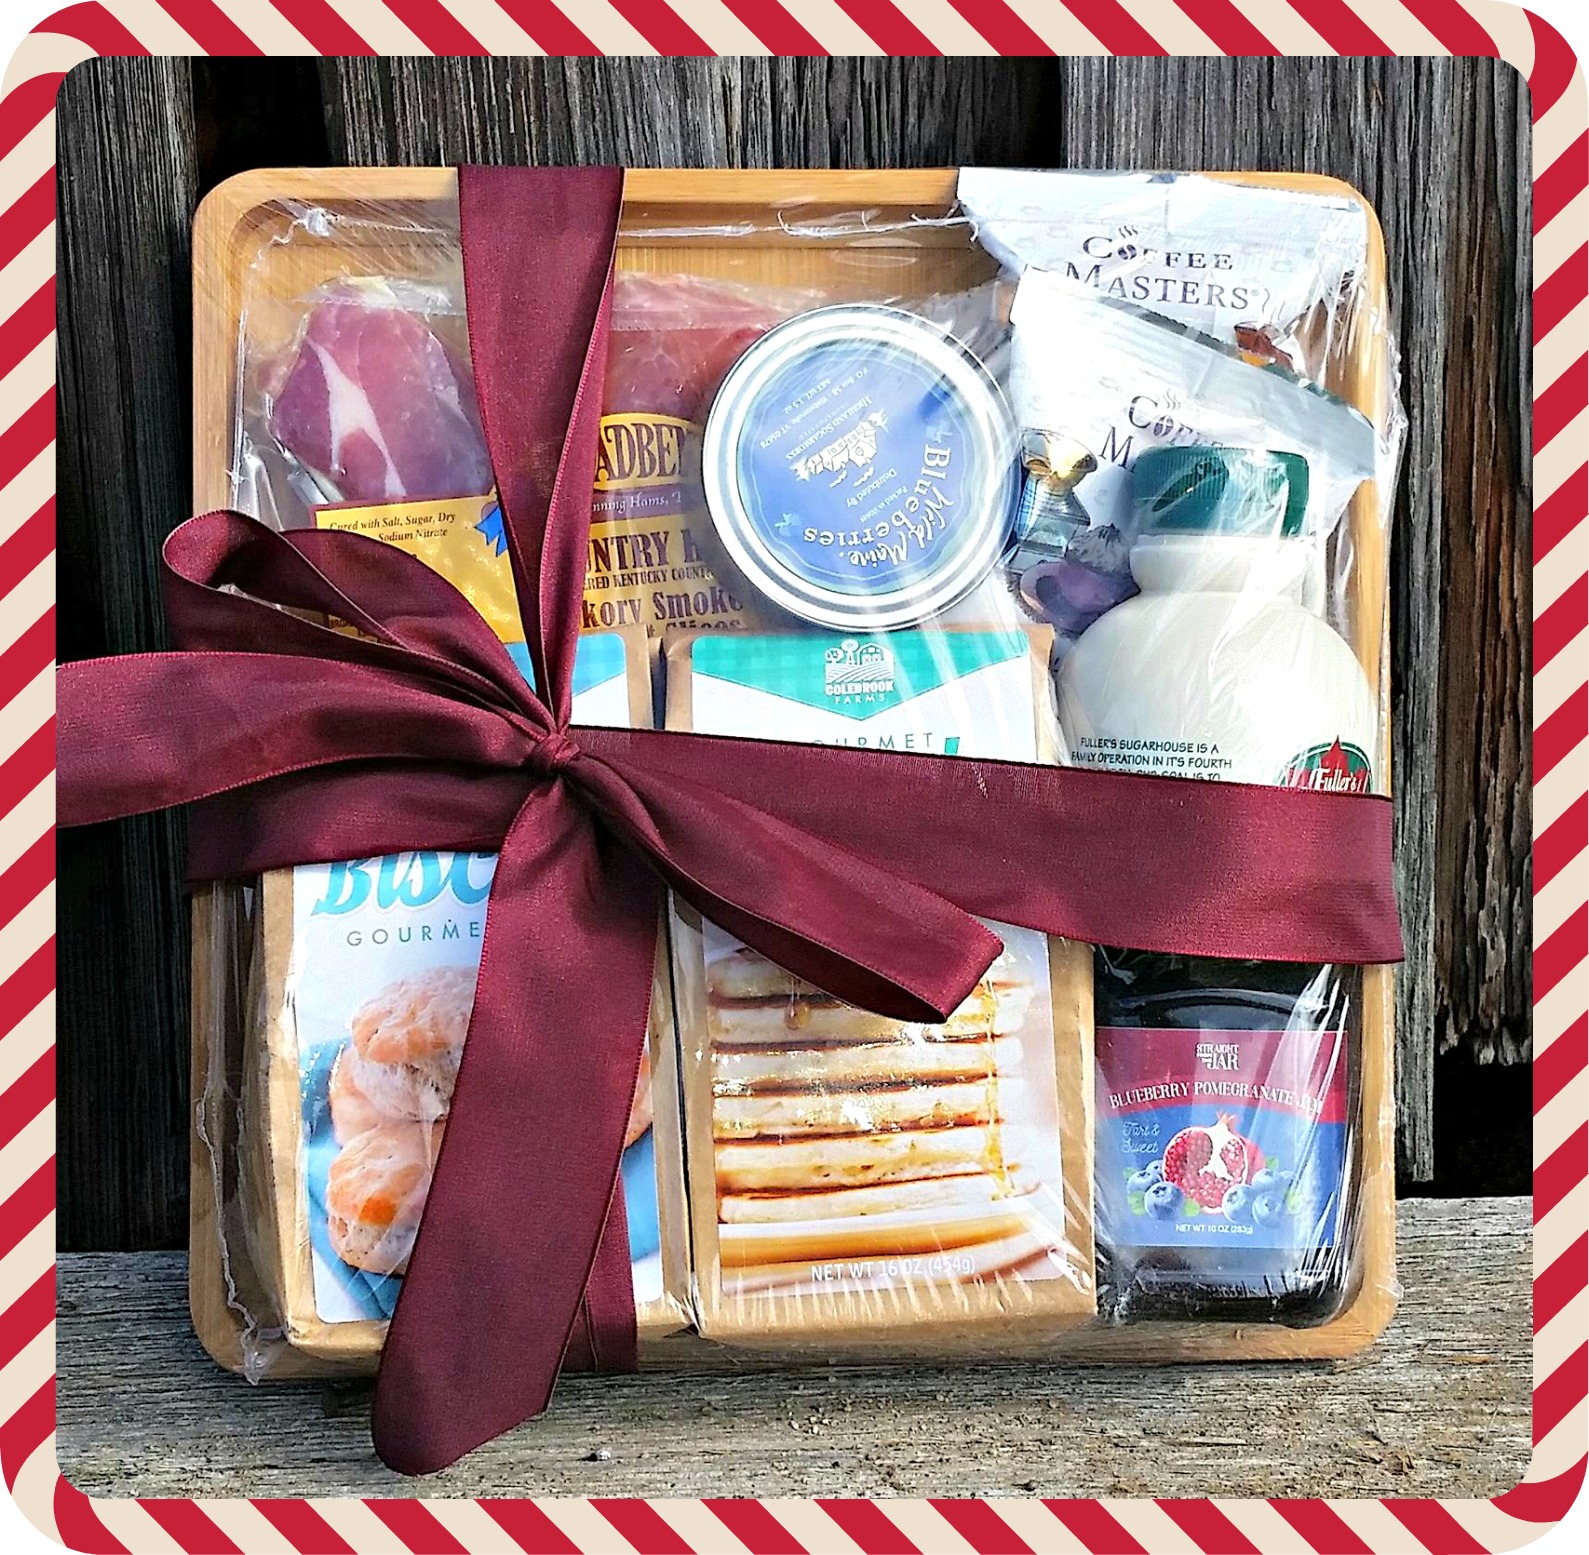 Last Minute GOURMET Gifts from Gourmet Gift Baskets - Wrapped Up N U